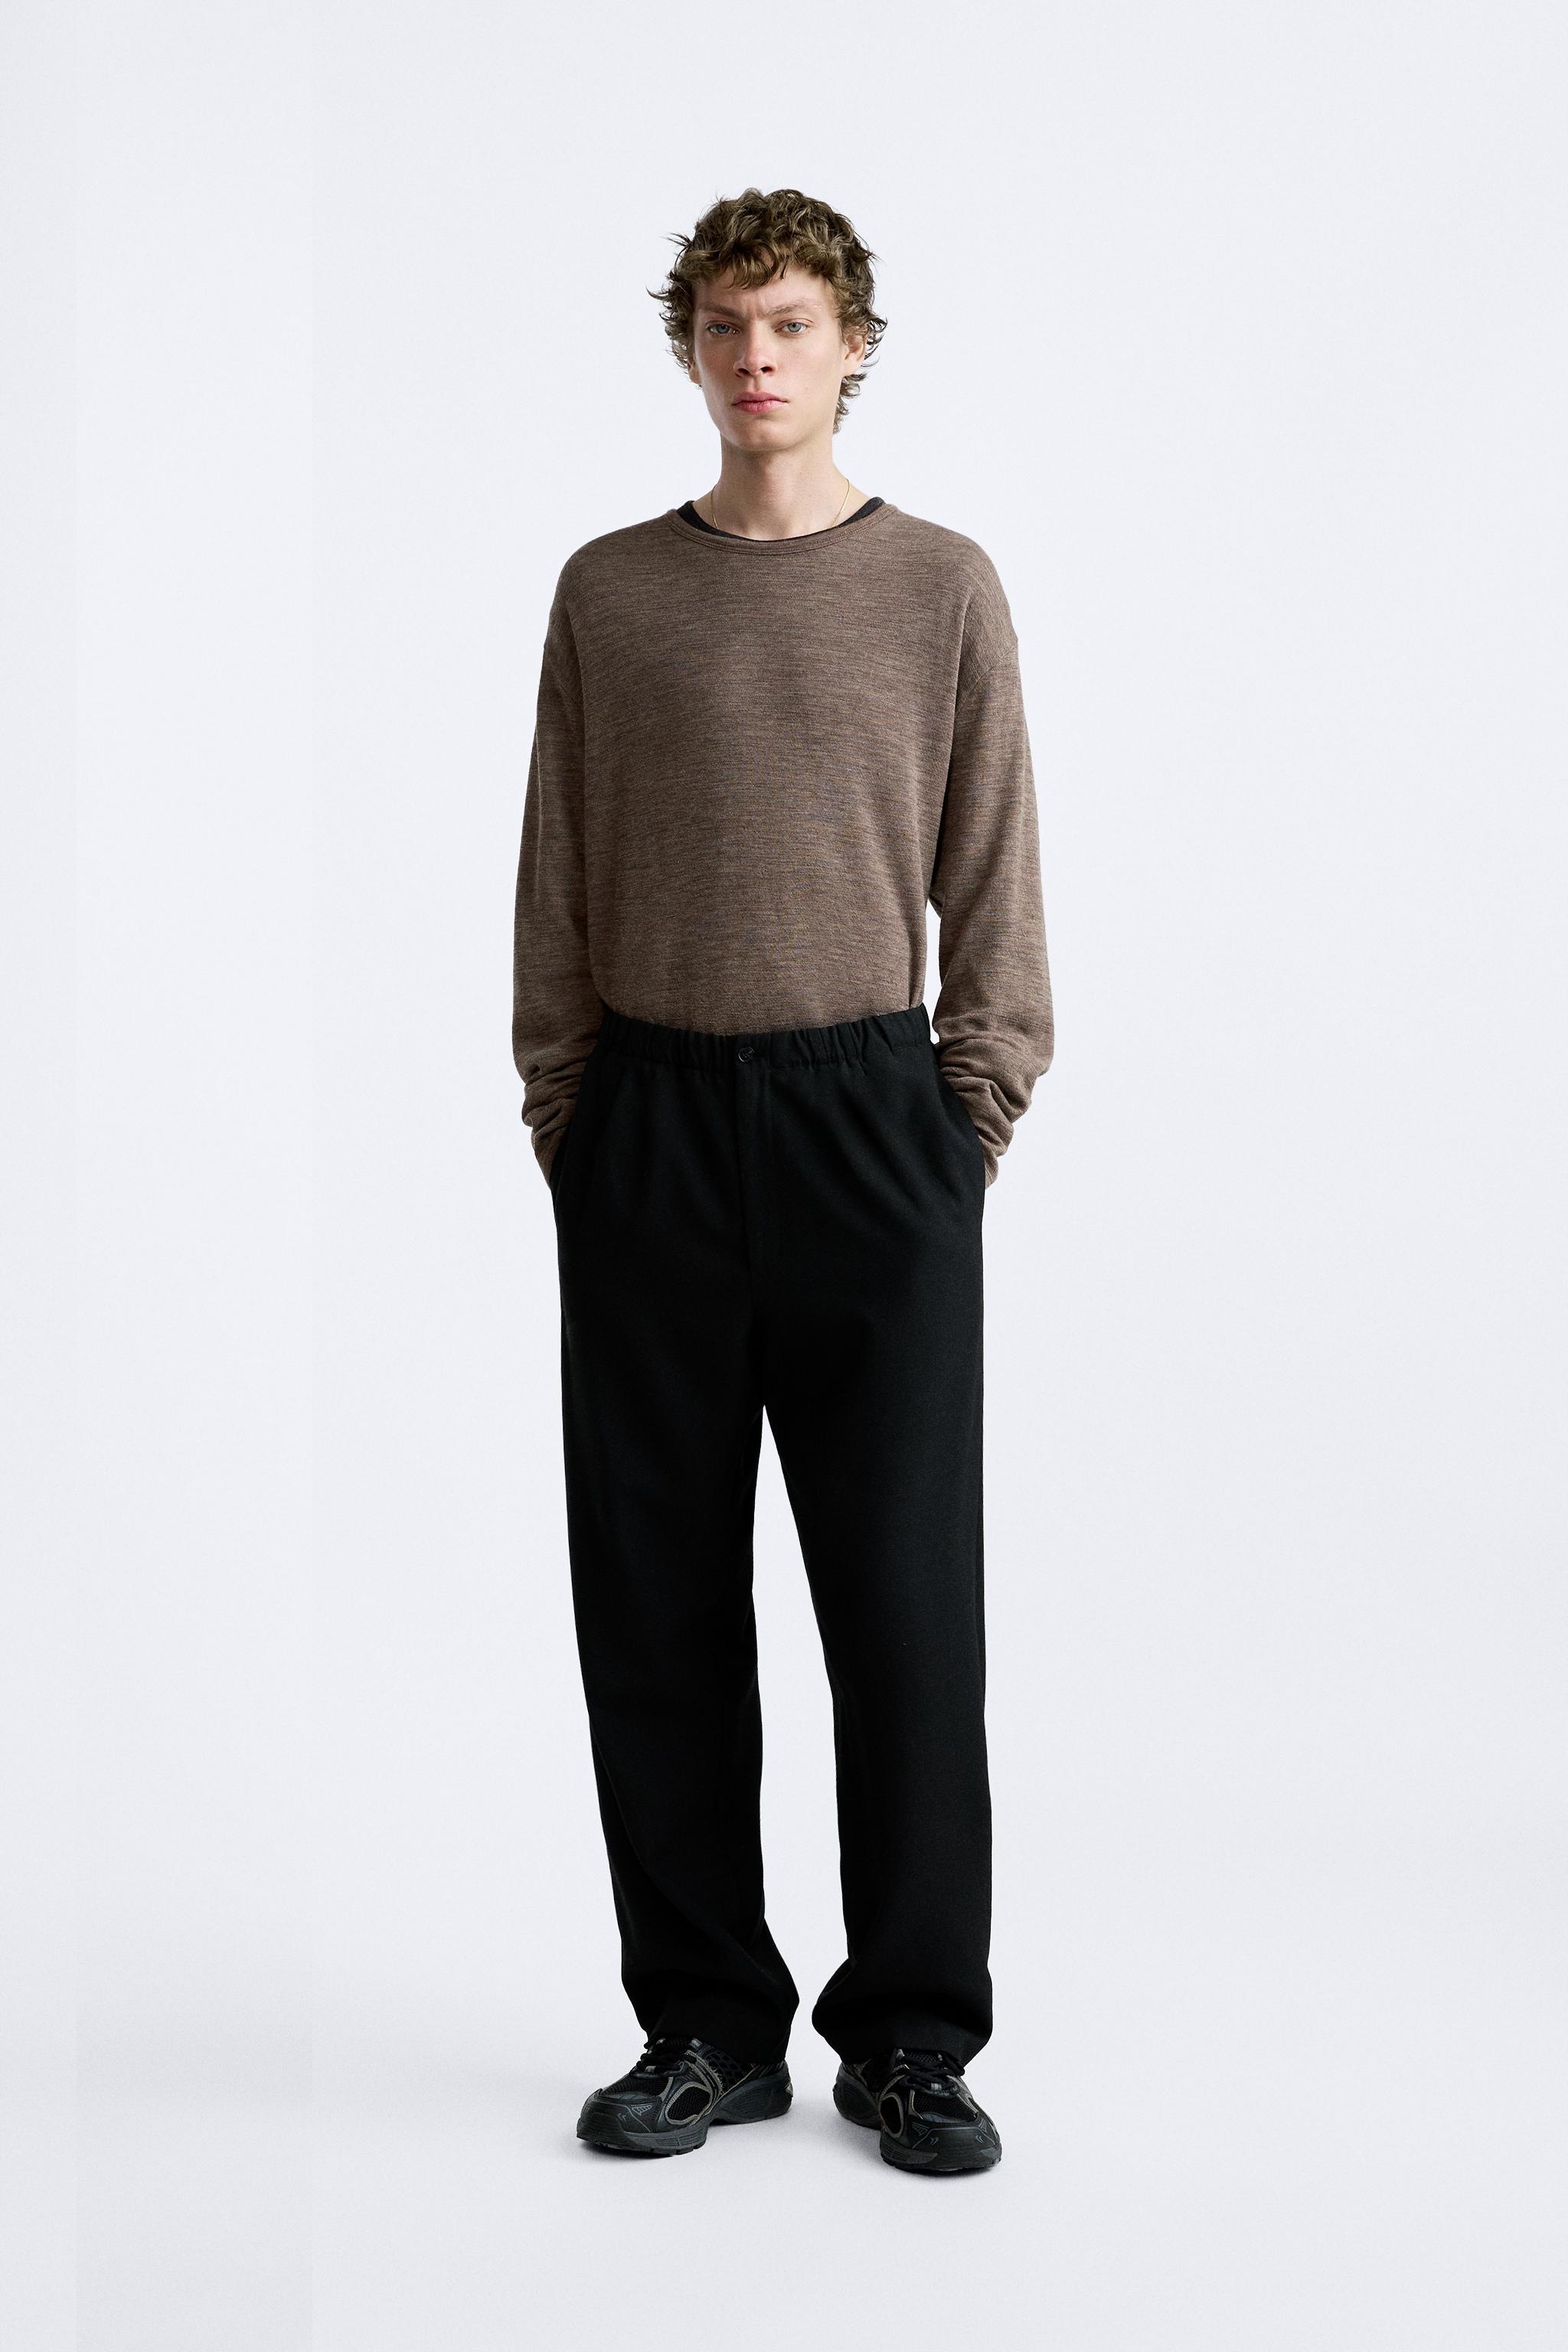 Wool blend knit top. Round neck and long sleeves., Origins special  collection.